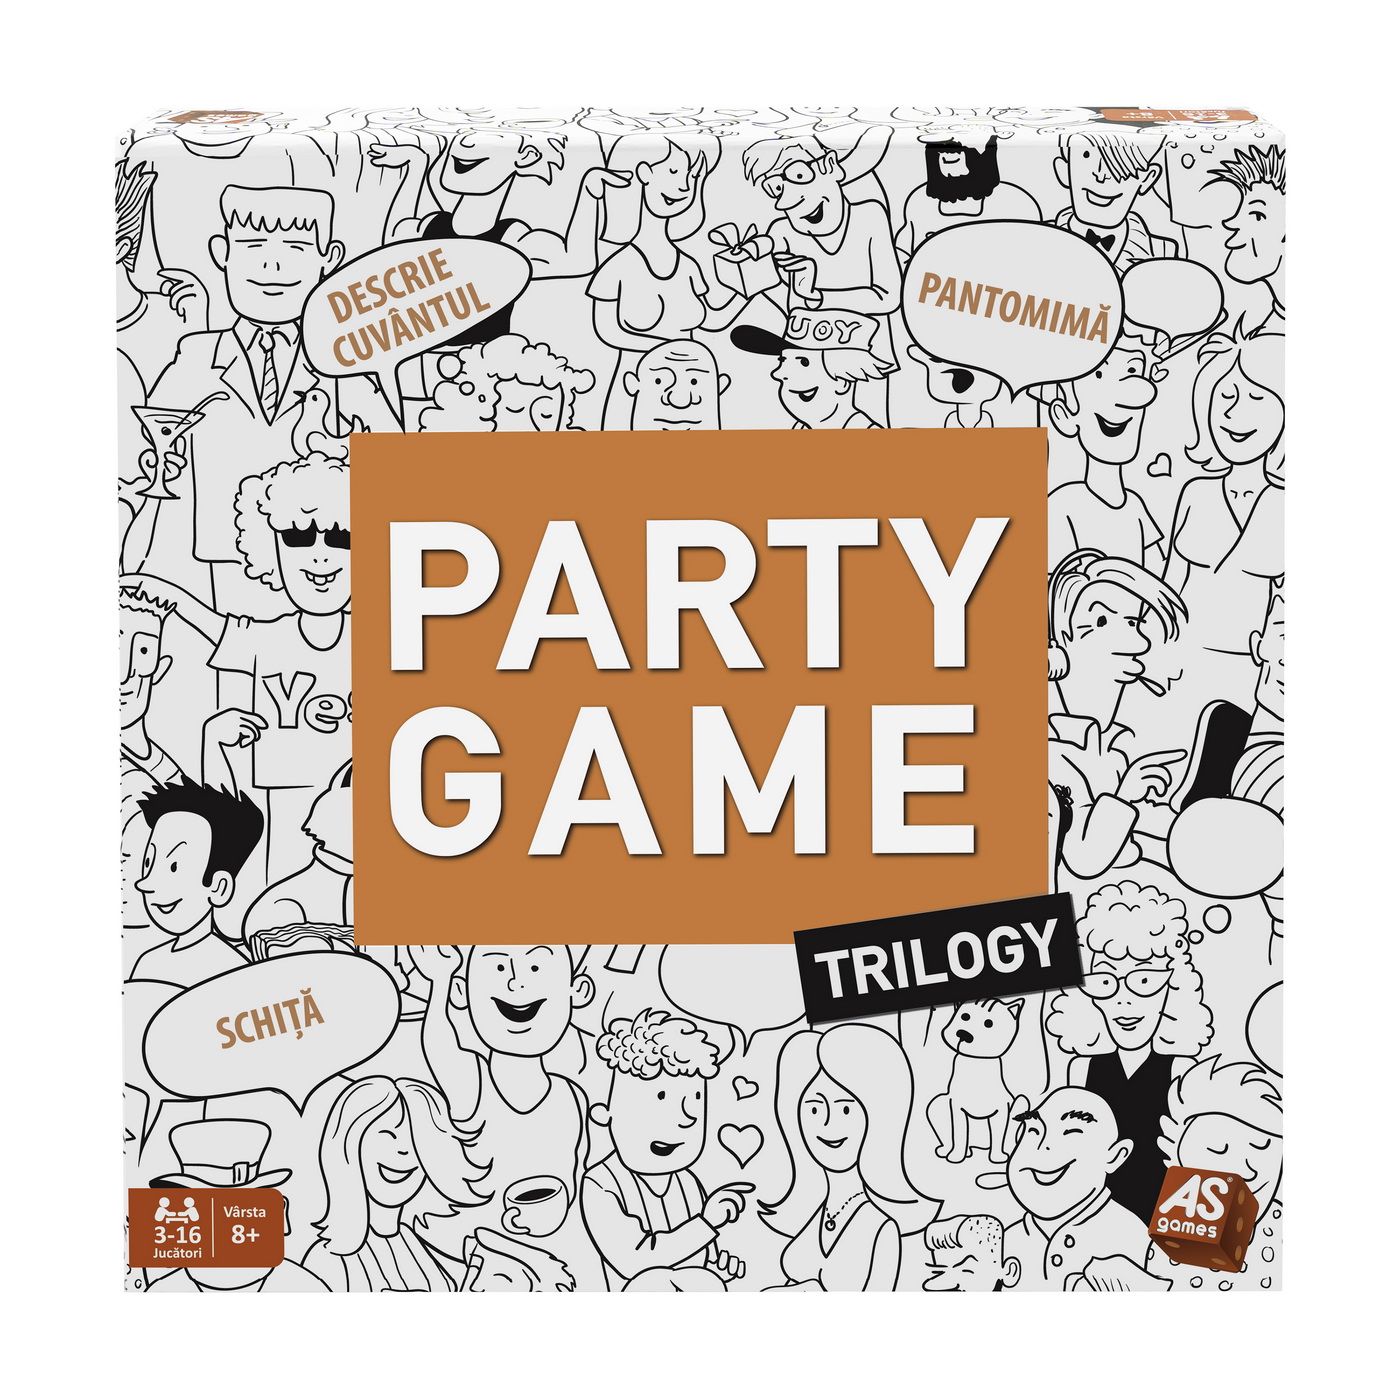 Party Game Trilogy | As games - 3